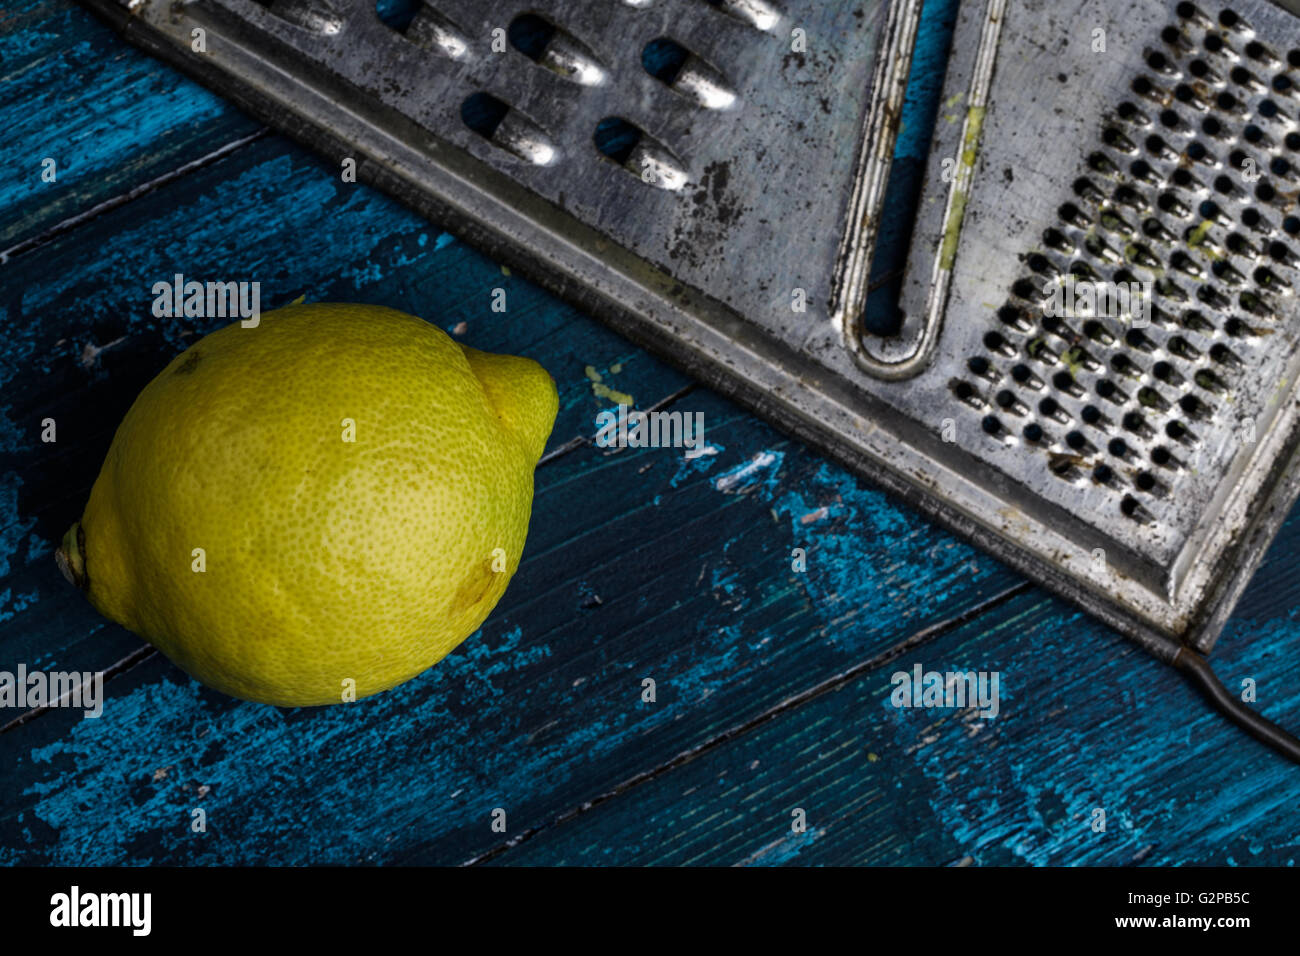 Fresh Lemon with metal grater on blue board Stock Photo